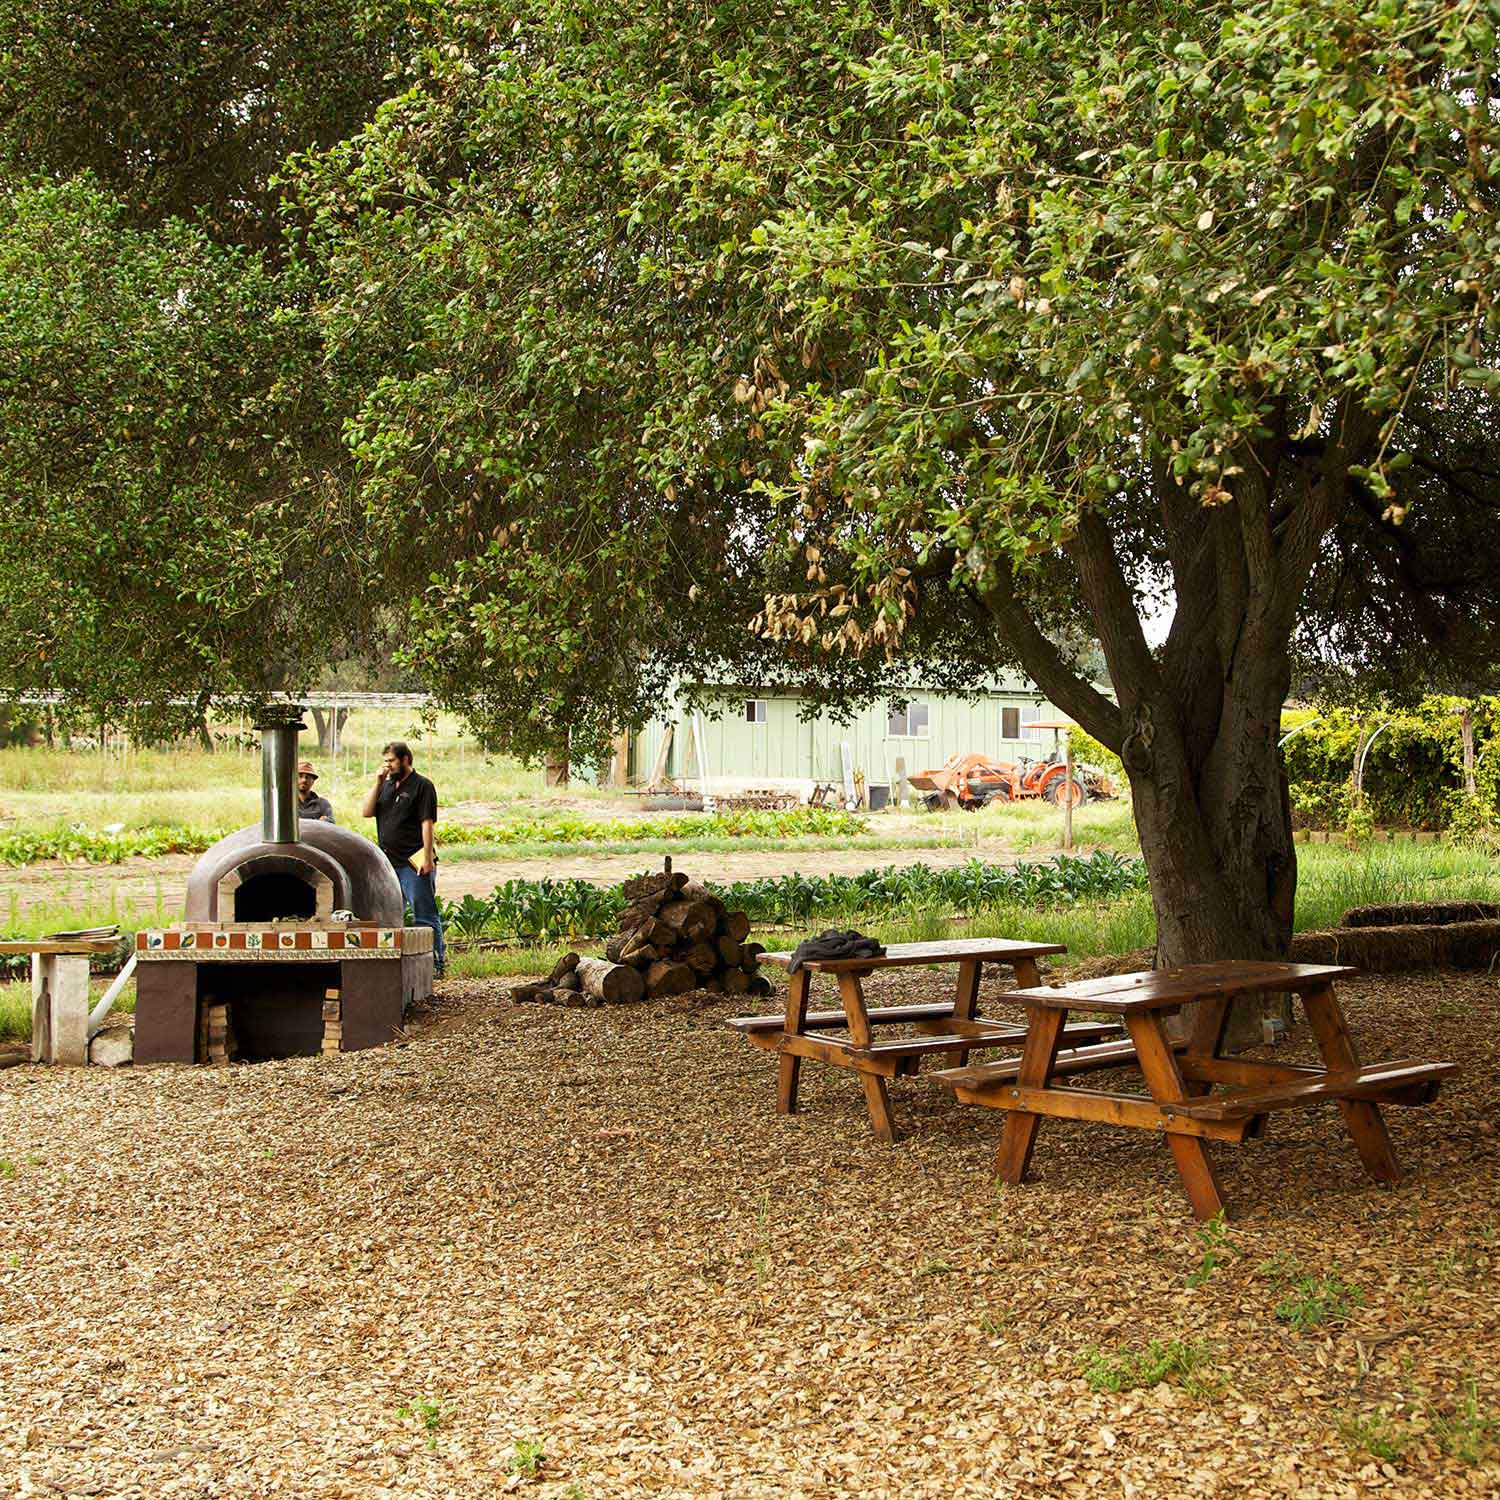 Outdoor picnic tables and trees